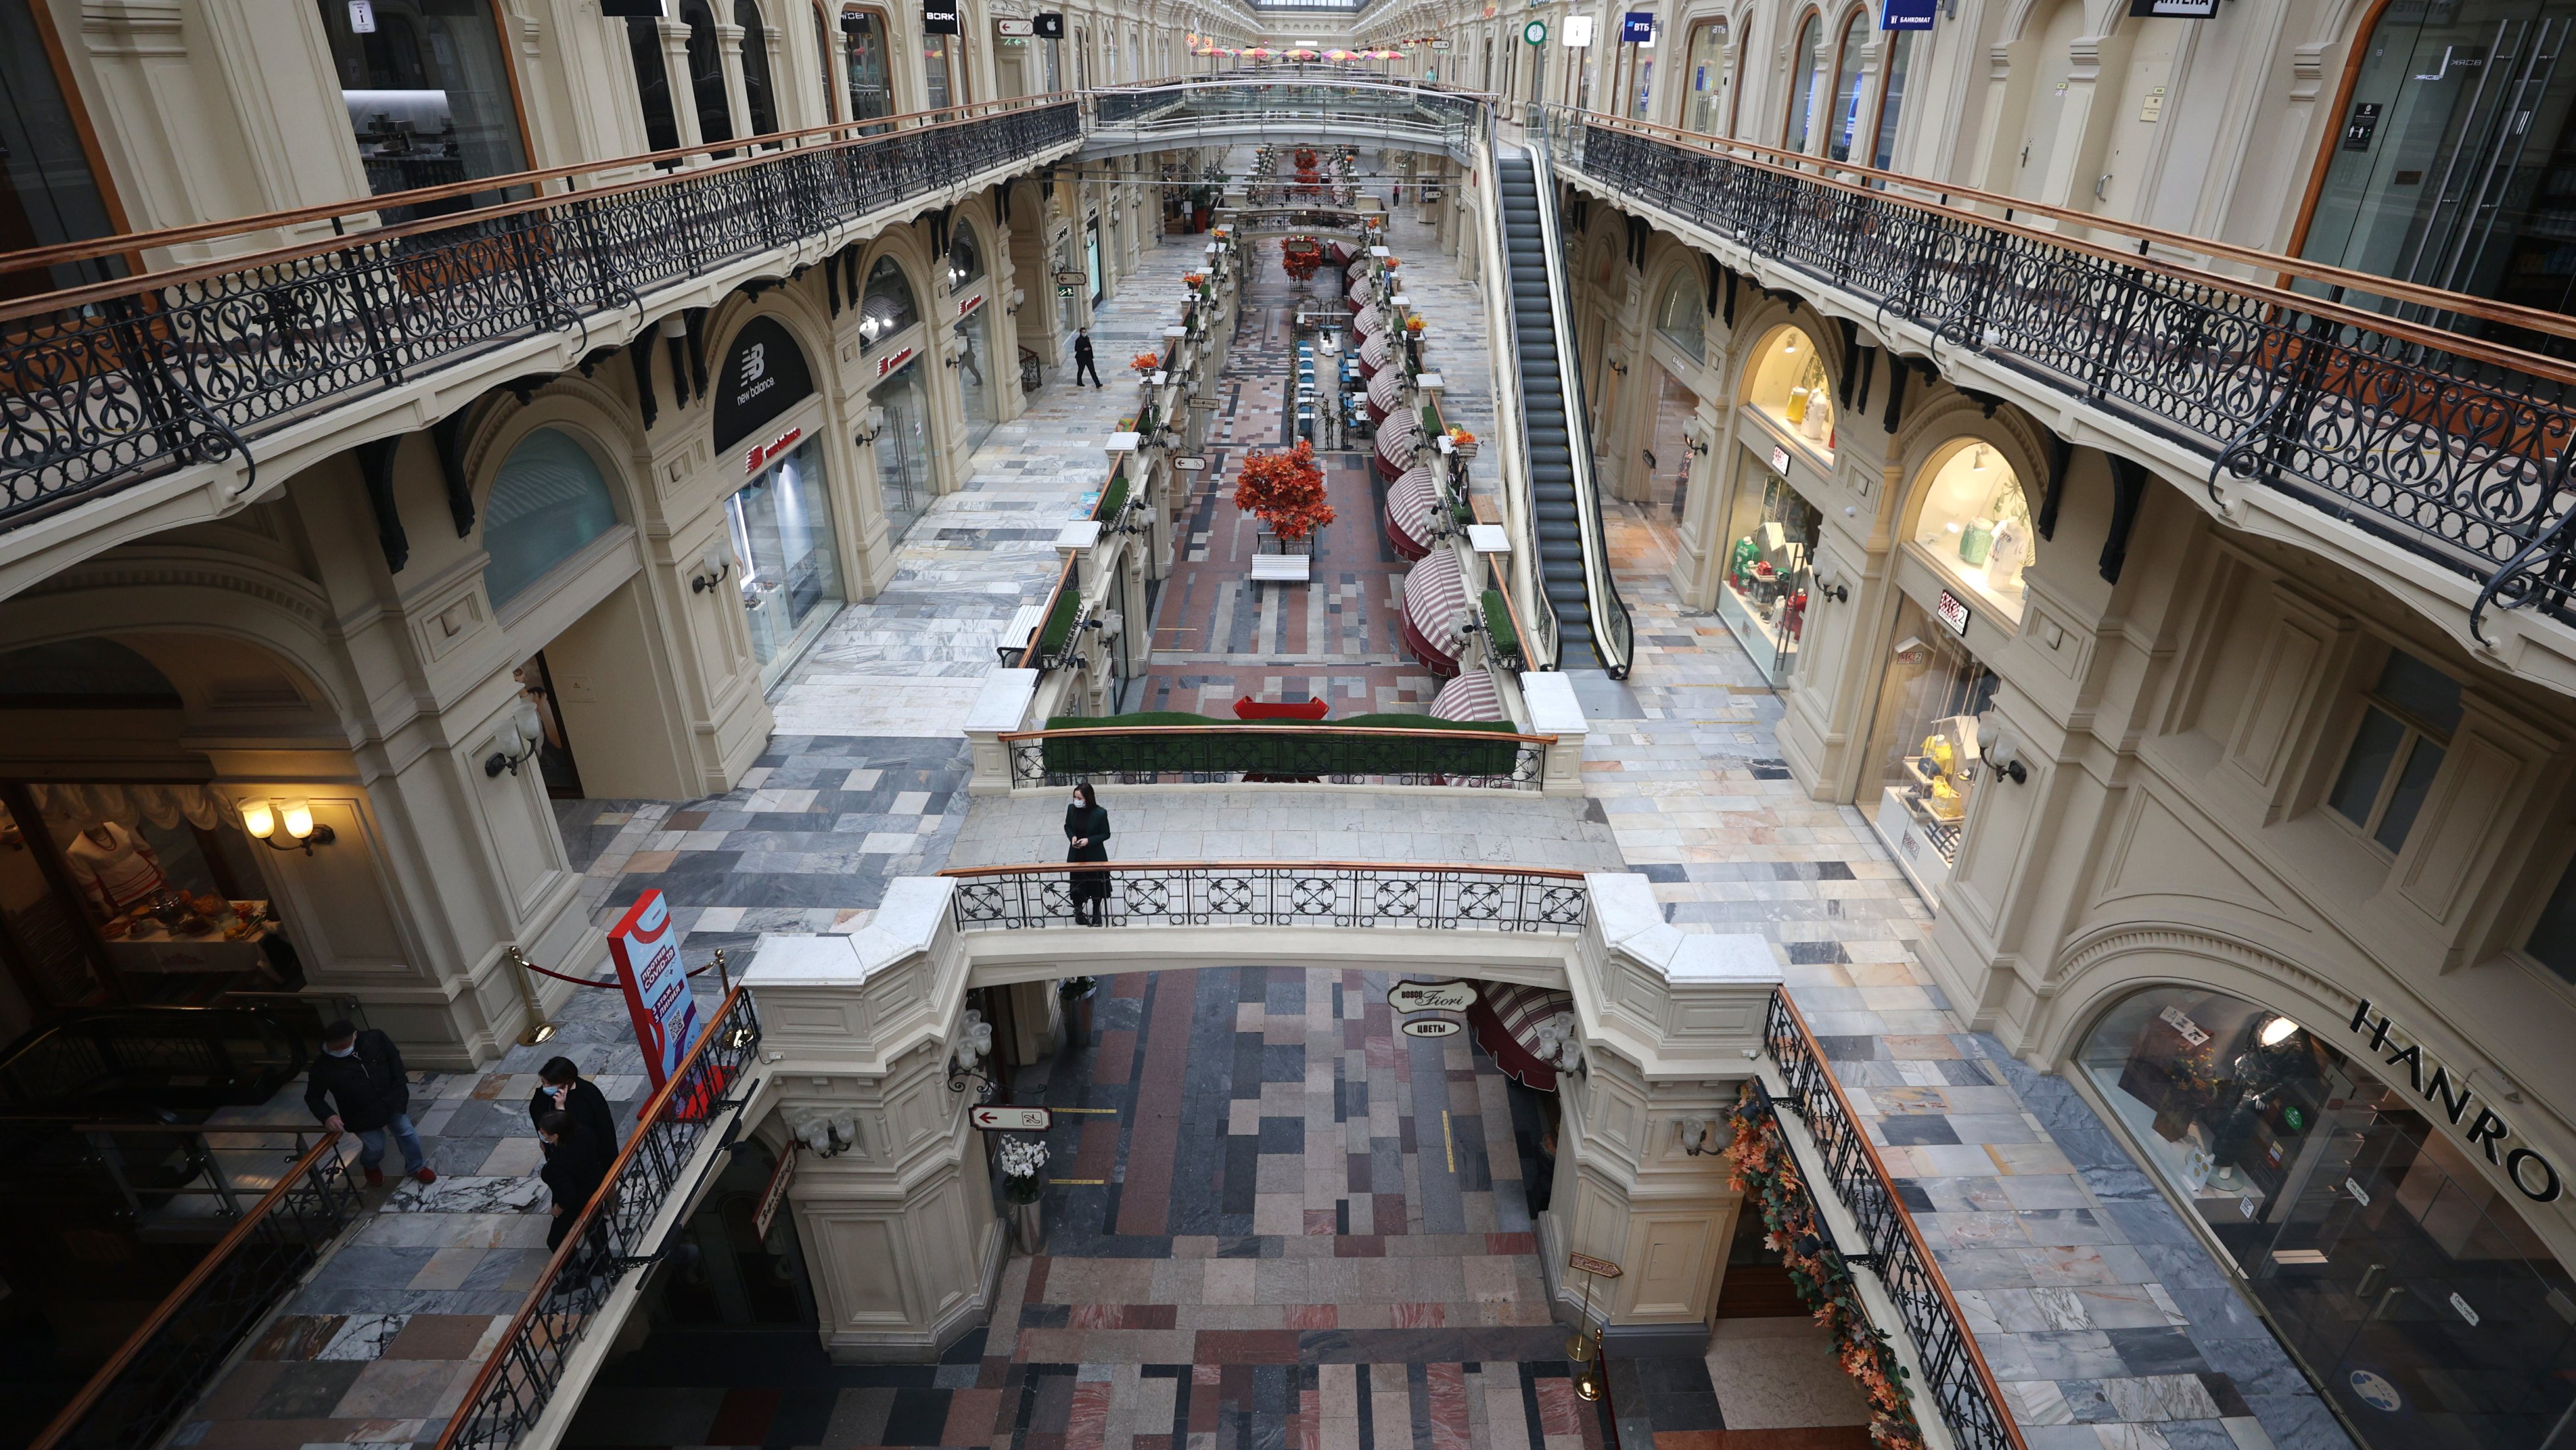 Moscows GUM department store amid COVID-19 lockdown